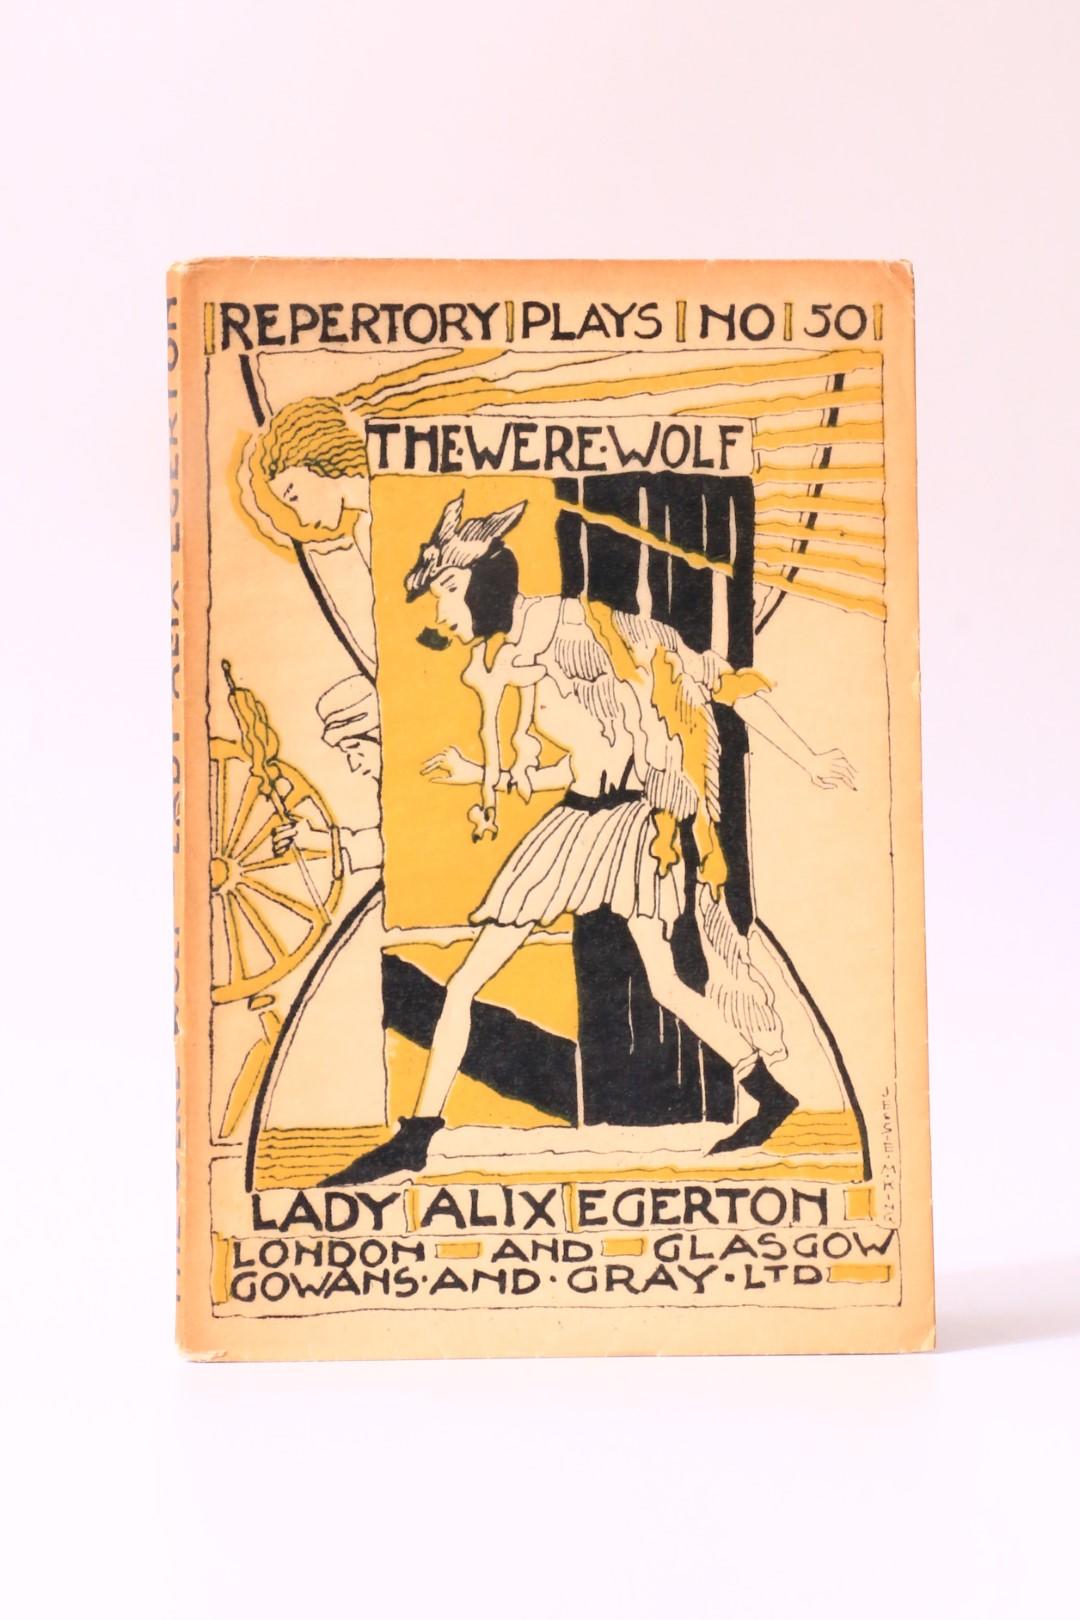 Alix Egerton - The Were-Wolf [in] Repertory Plays [#50] - Gowans and Gray, 1926, First Edition.